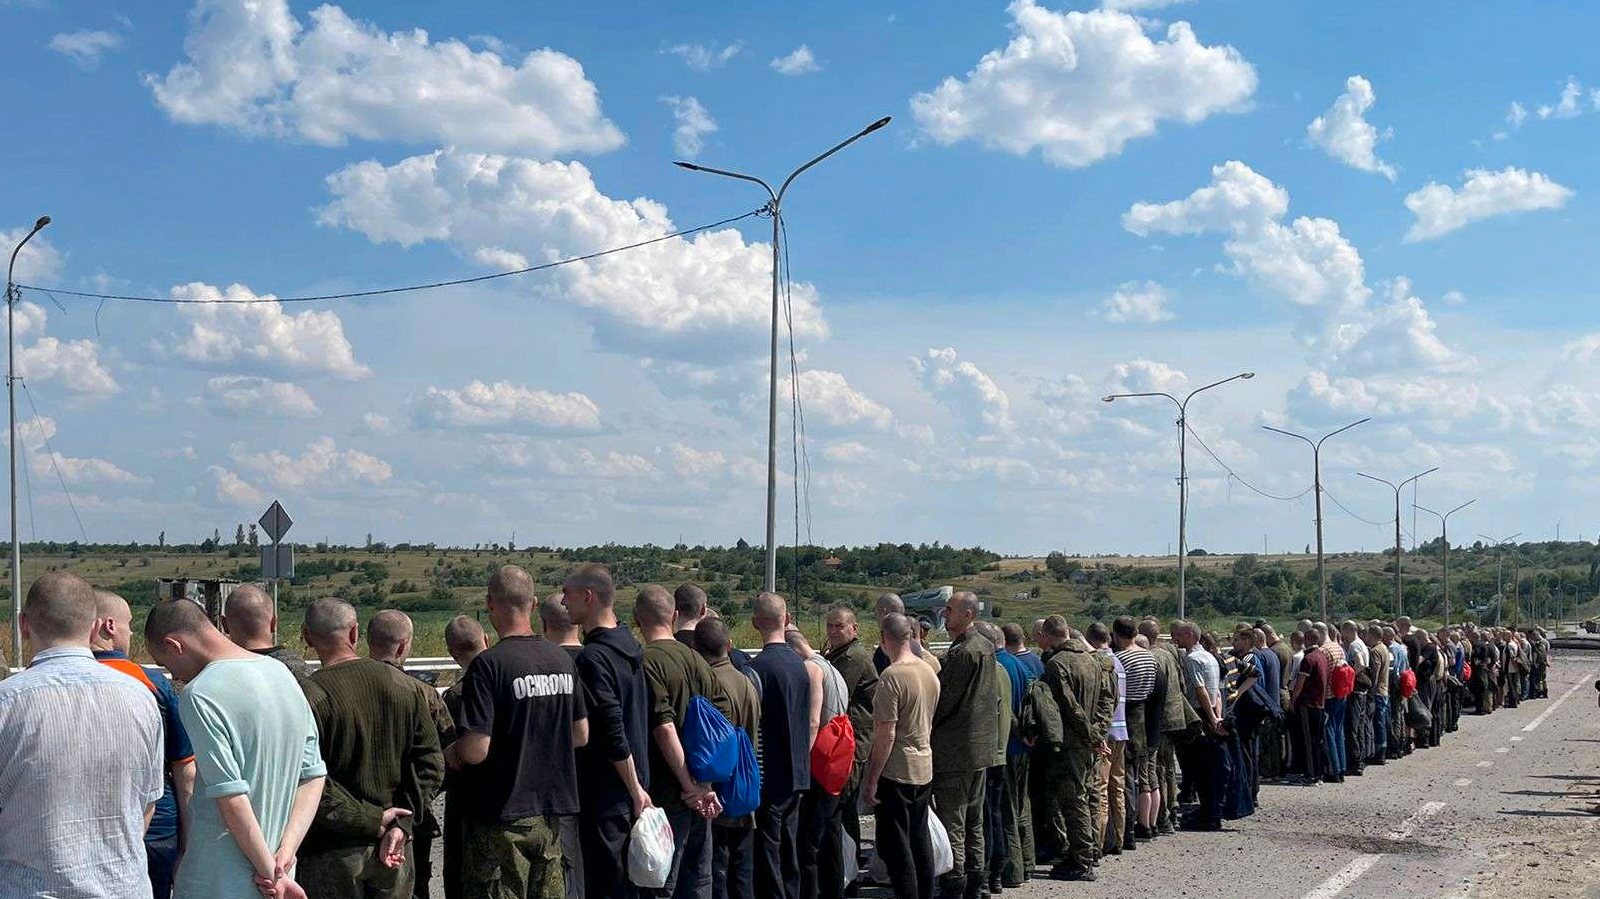 epa10042215 A handout picture made available by the press service of the Defense Intelligence of the Ministry of Defense of Ukraine, shows Ukrainian prisoners of war who were released as part of a prisoner swap with Russia, walking towards the Ukrainian side at an undisclosed location, Ukraine, 29 June 2022. The 144 Ukrainian soldiers were released from Russian captivity, 95 of them were part of the Azovstal (Mariupol) fighters. According to a statement by the Ukrainian Presidential Office on 06 June quoting President Zelensky, there may be more than 2,500 prisoners from the Azovstal plant being held captive by Russian forces.  EPA/Defense Intelligence Ministry of Defense of Ukraine HANDOUT EDITORIAL USE ONLY NO SALES HANDOUT EDITORIAL USE ONLY/NO SALES